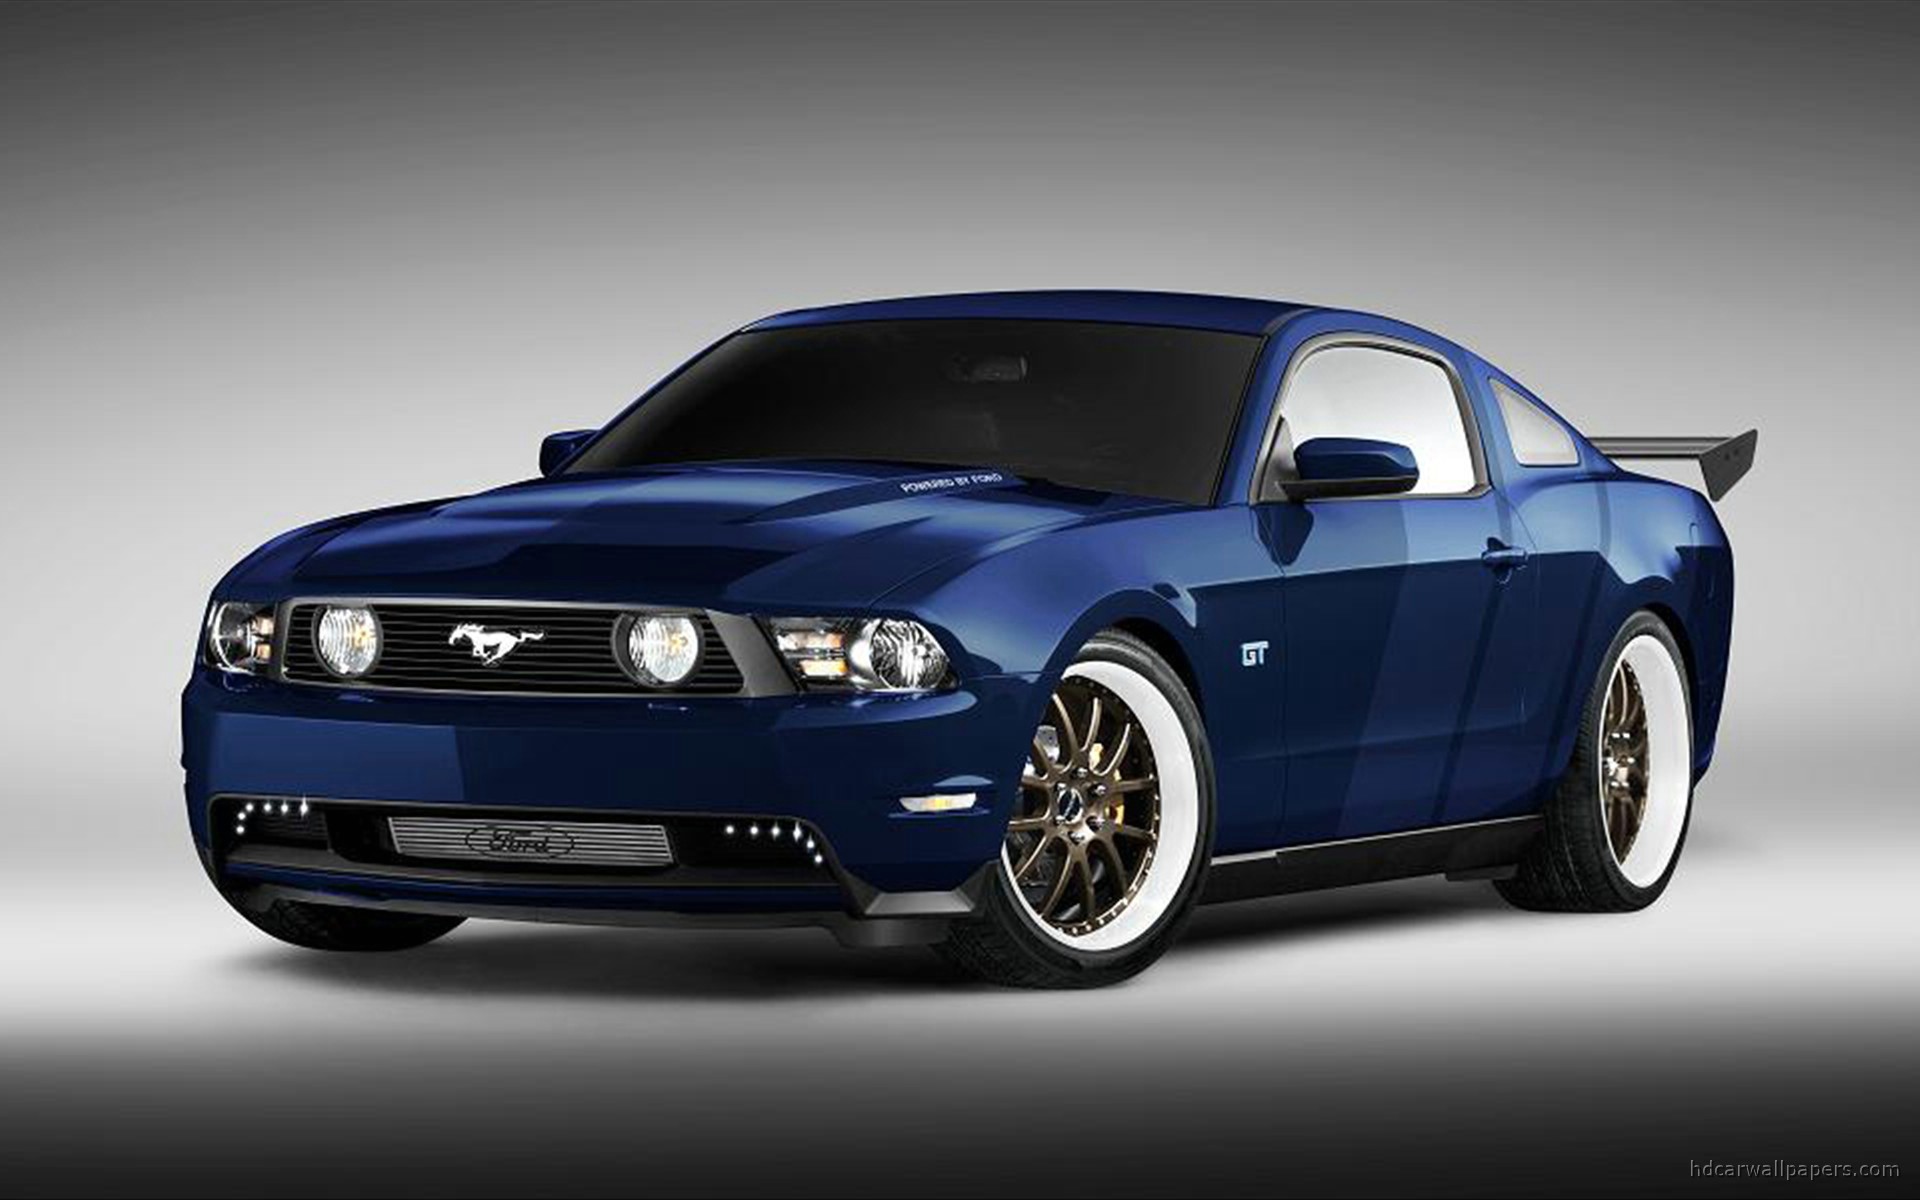 Ford Mustang Wallpaper 5719 Hd Wallpapers in Cars   Imagescicom